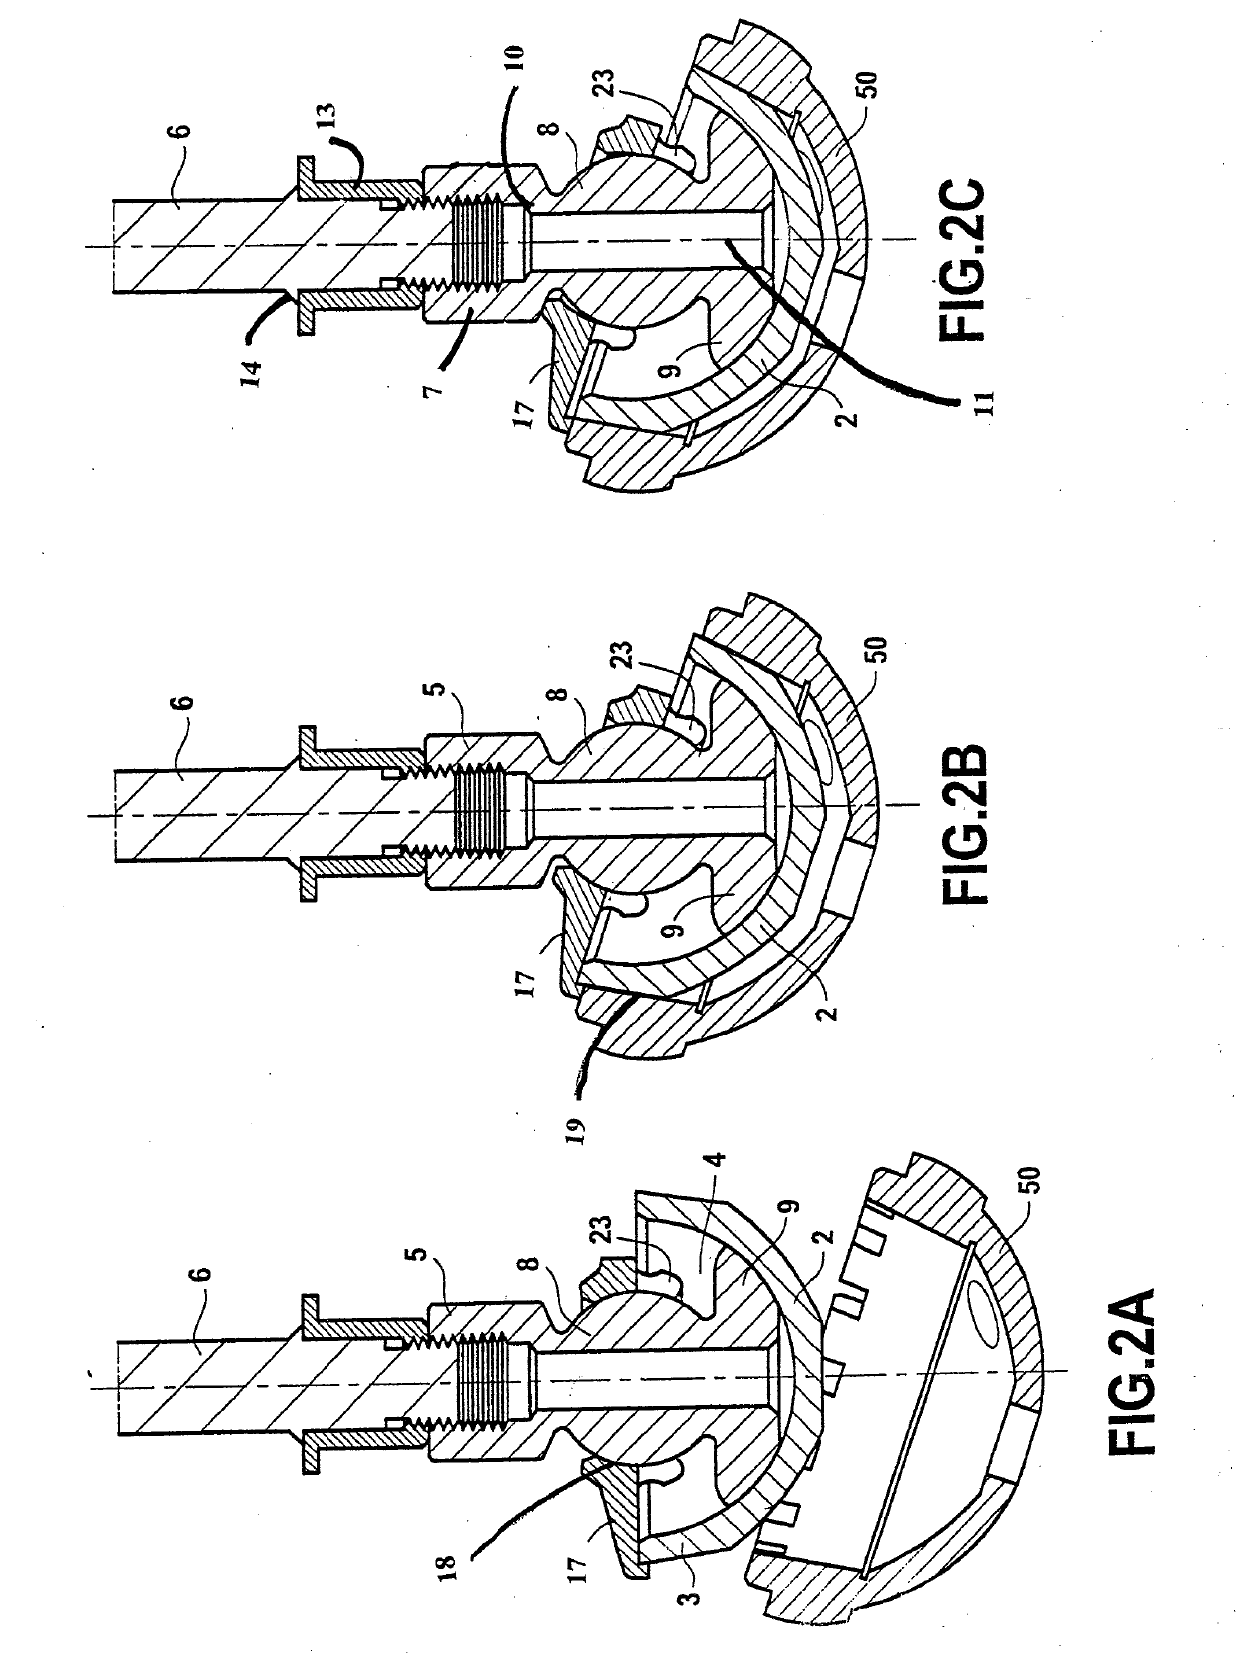 Device for gripping and inserting an insert element